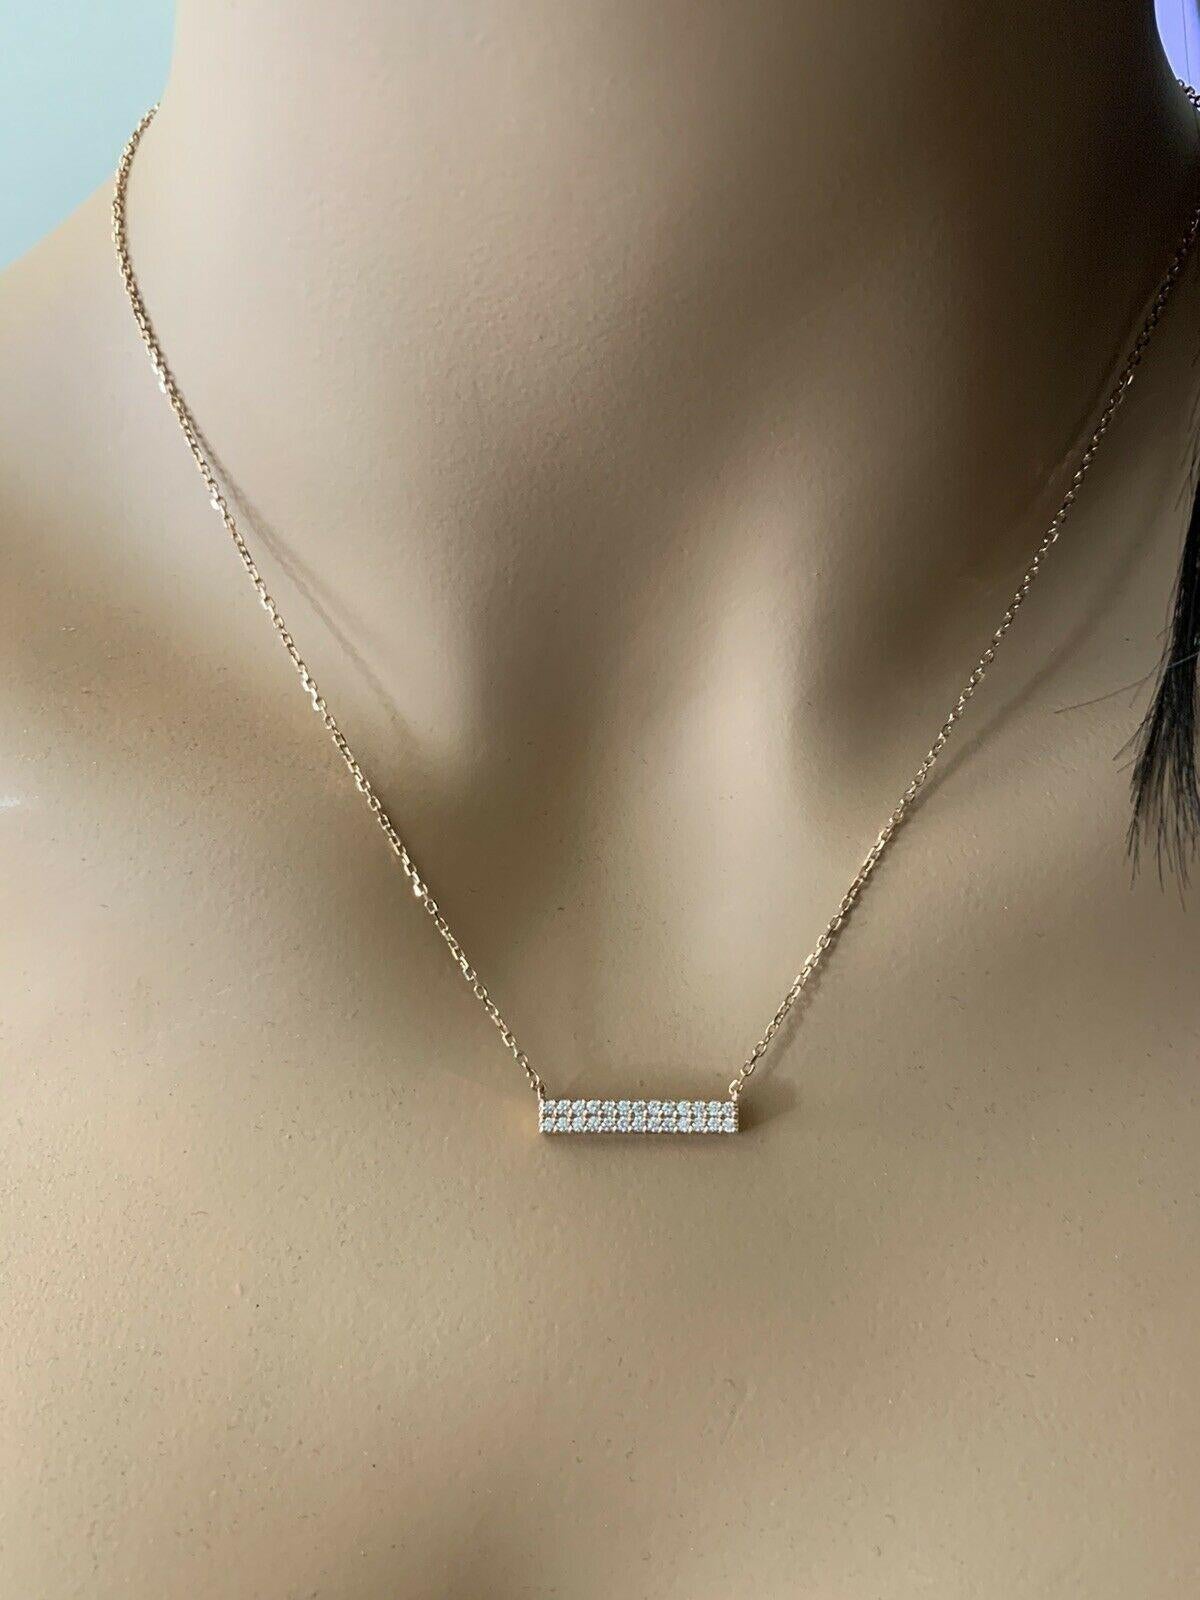 0.35Ct Stunning 14K Solid Rose Gold Diamond Bar Necklace For Sale 2